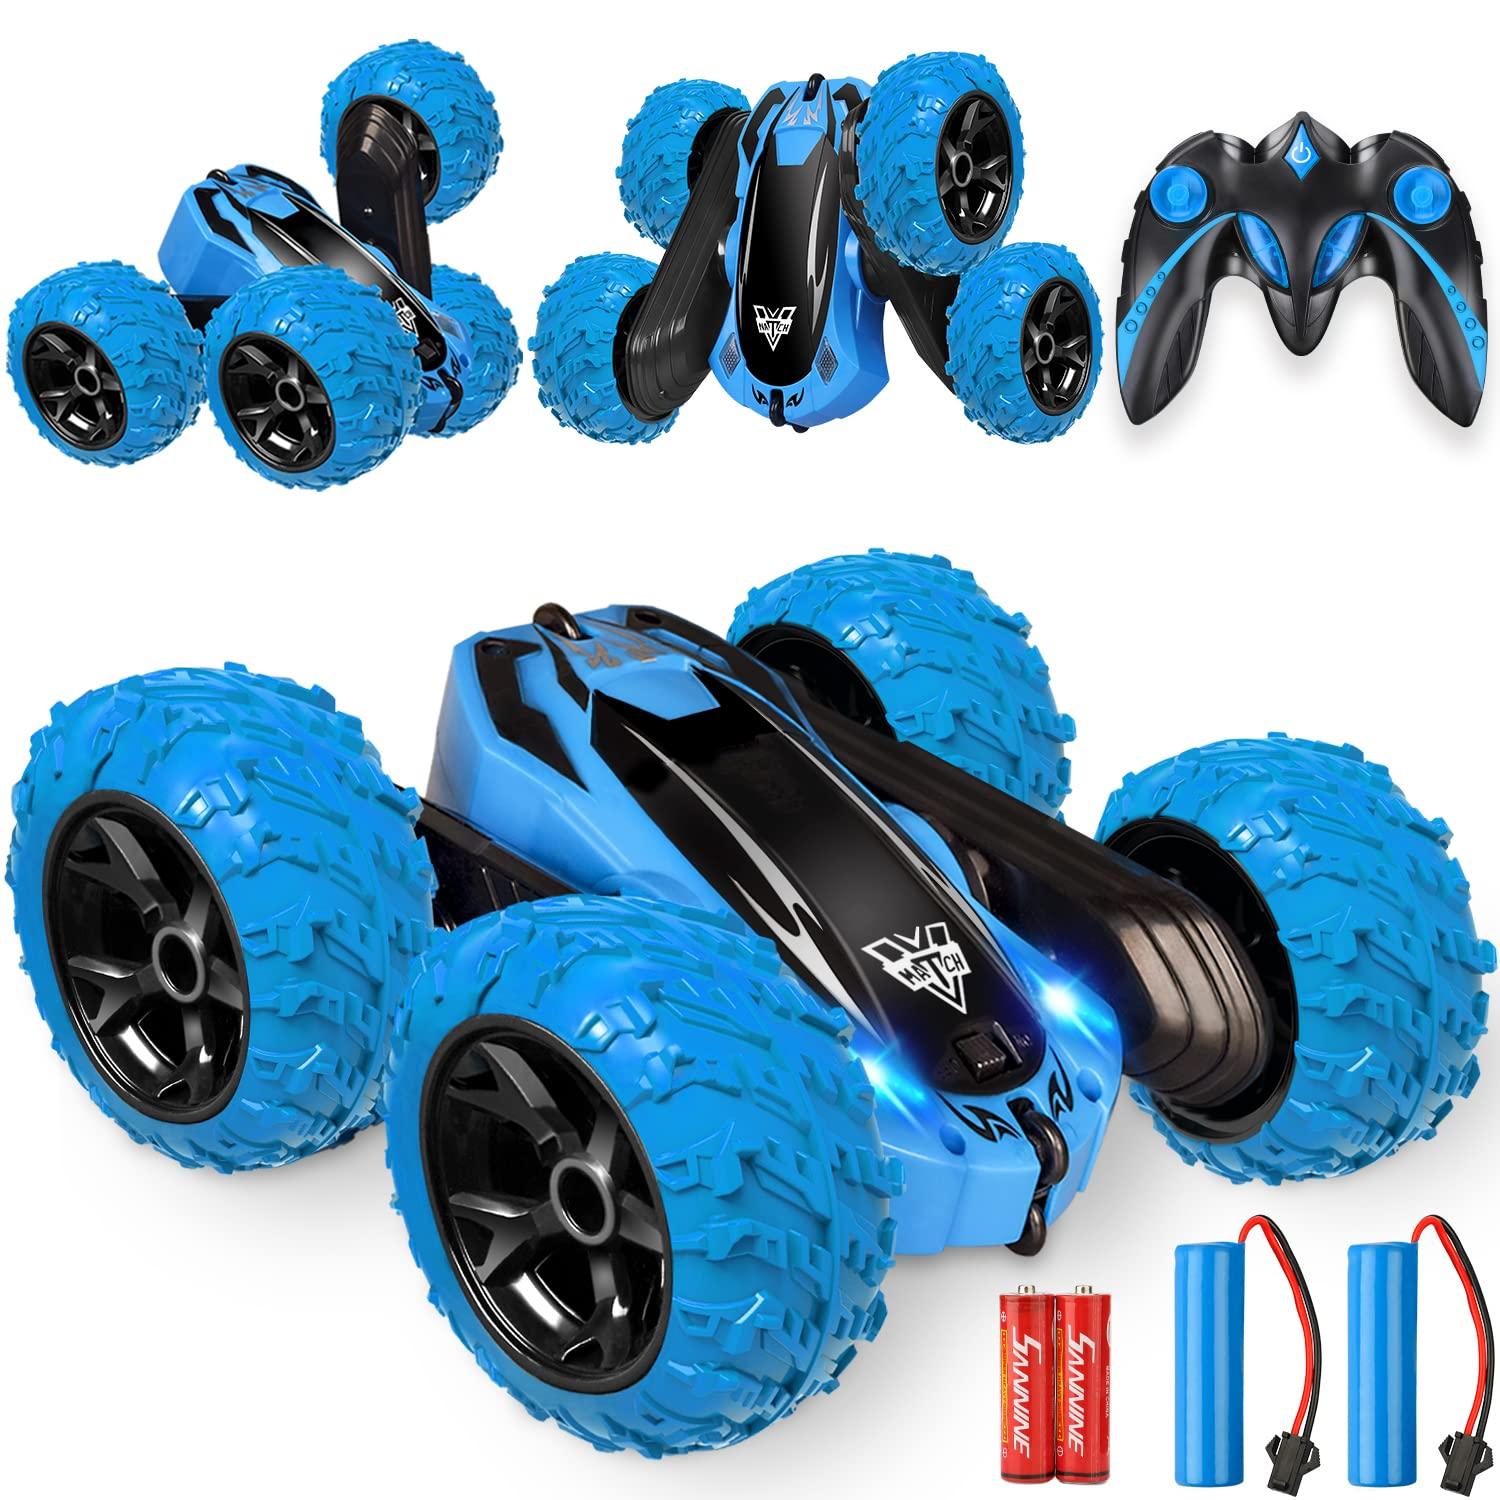 Rc Stunt Car 360: RC Stunt Car 360: A Must-Have for RC Enthusiasts